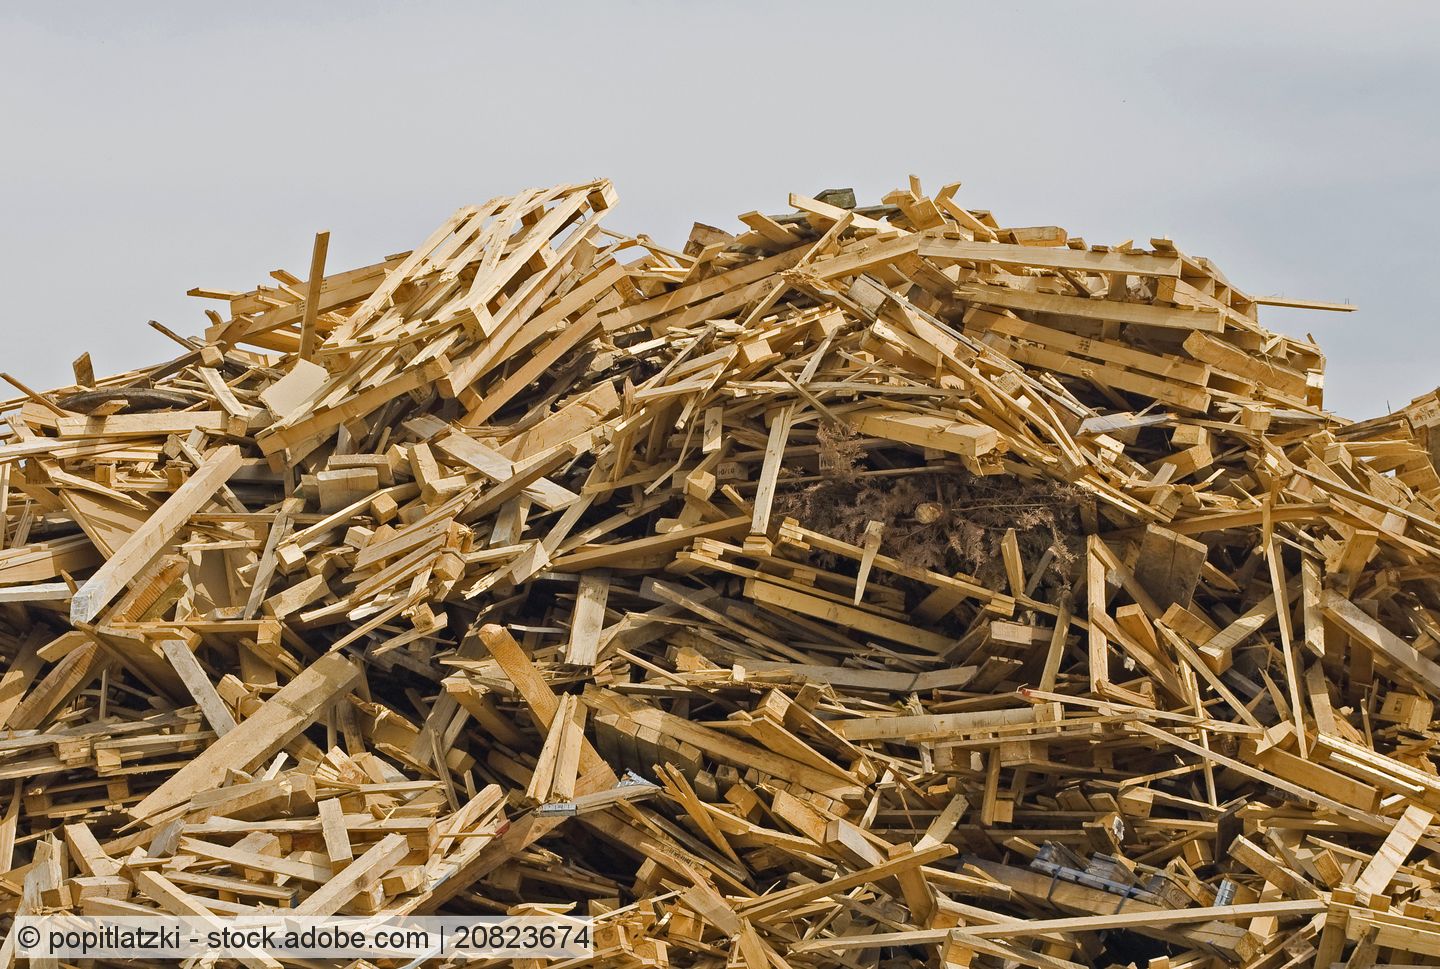 A heap of waste wood stored in a yard.